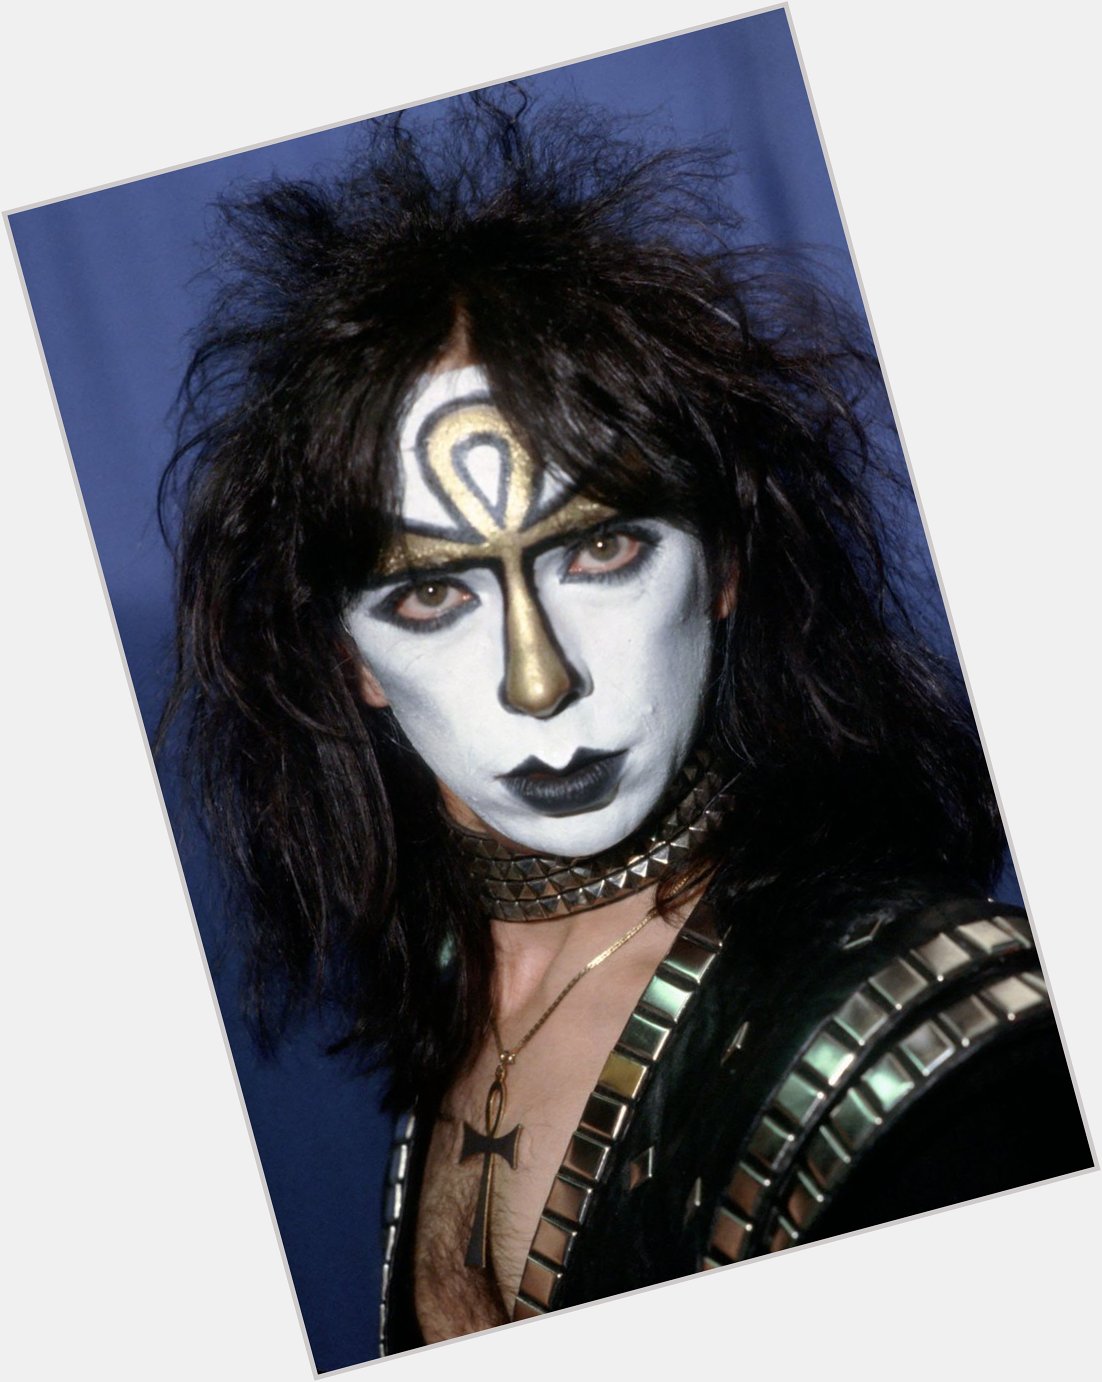 Happy 70th birthday to former KISS guitarist Vinnie Vincent! 